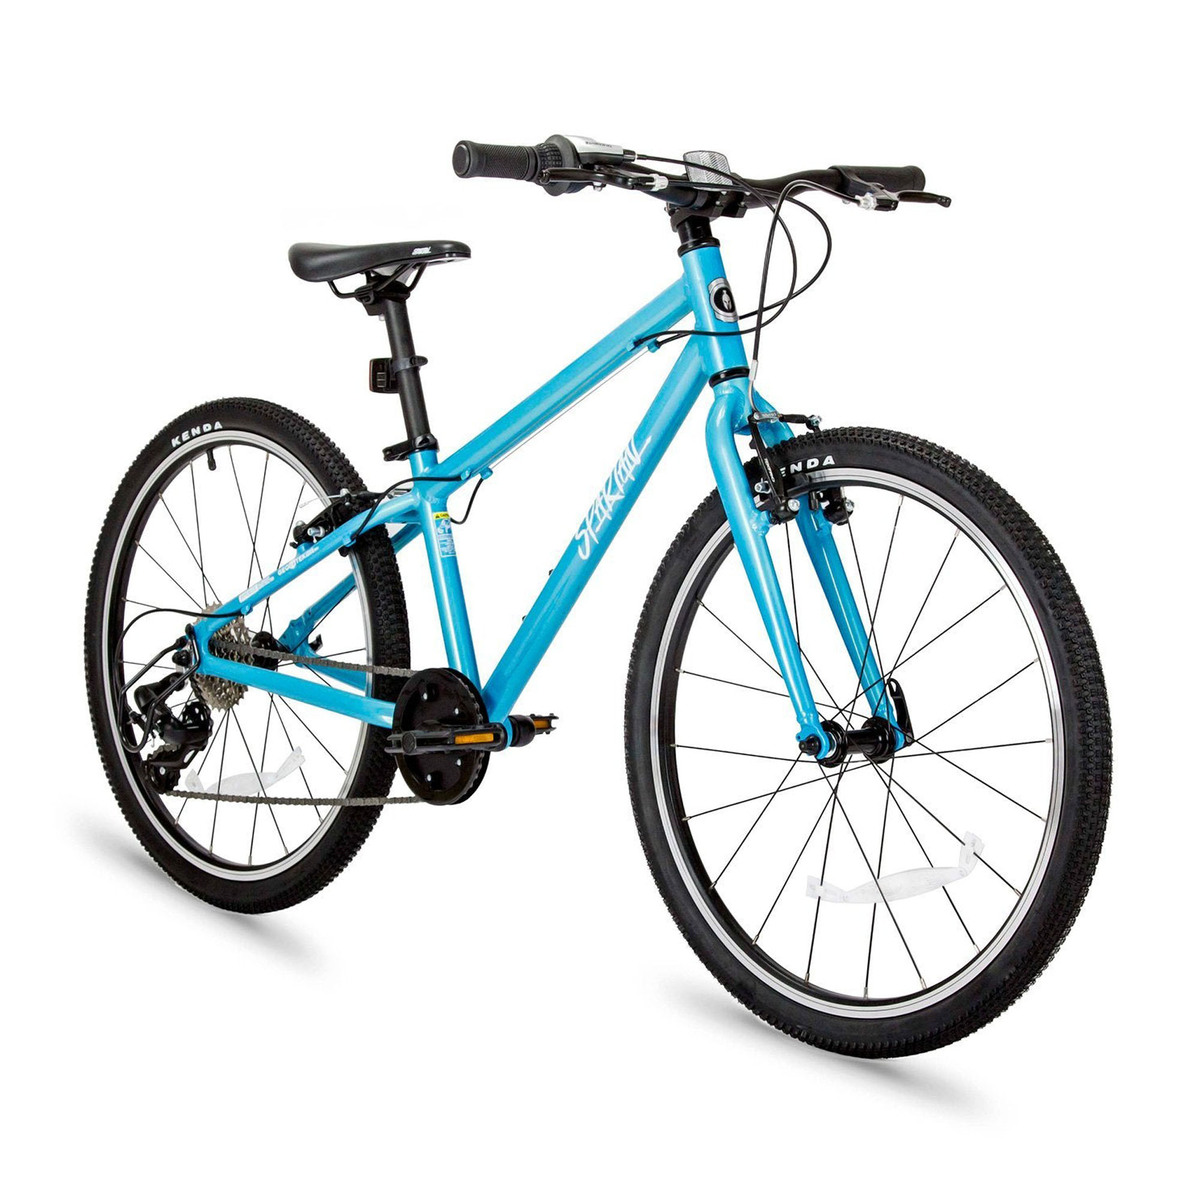 Spartan 24 inches Hyperlite Alloy Bicycle, Light Blue, SP-3143